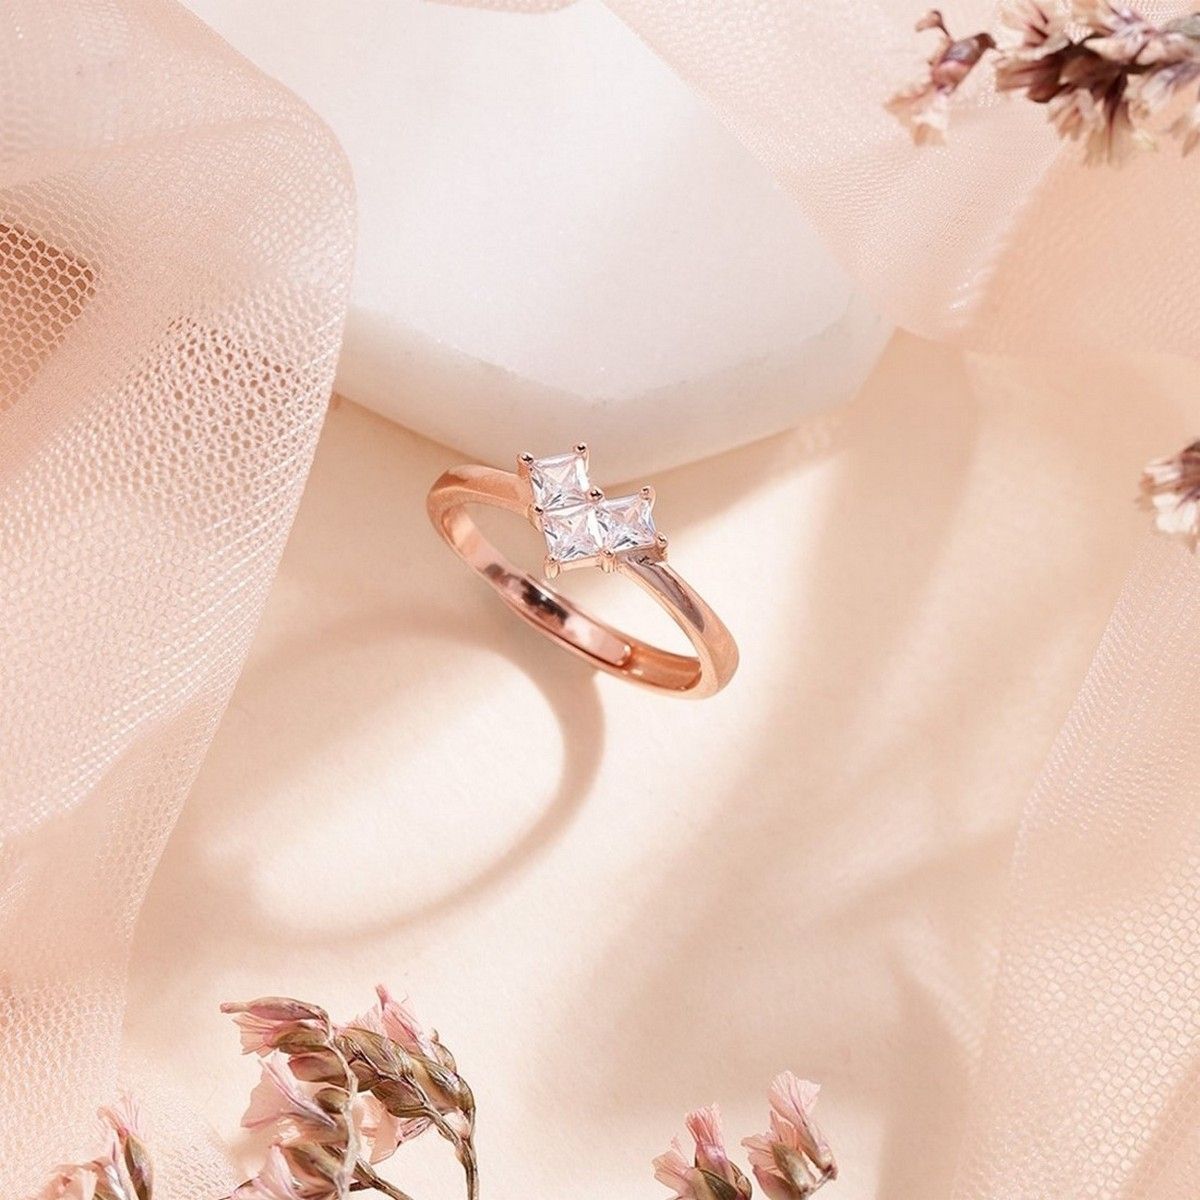 Silver, Rose Gold & CZ Mix & Match Stacking Rings - Cavendish French